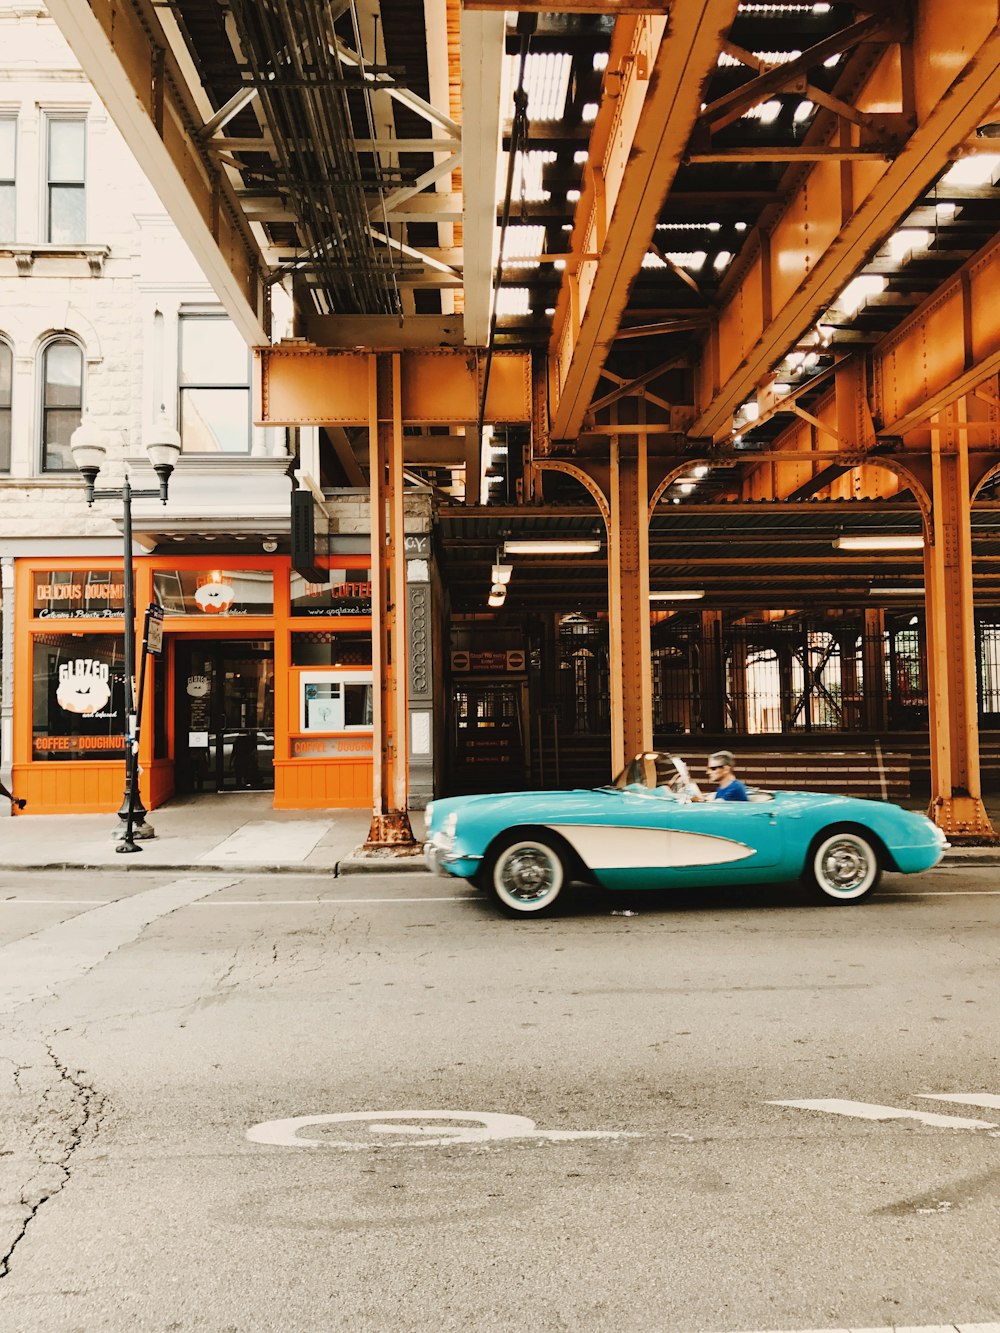 teal coupe parked beside brown wooden building during daytime